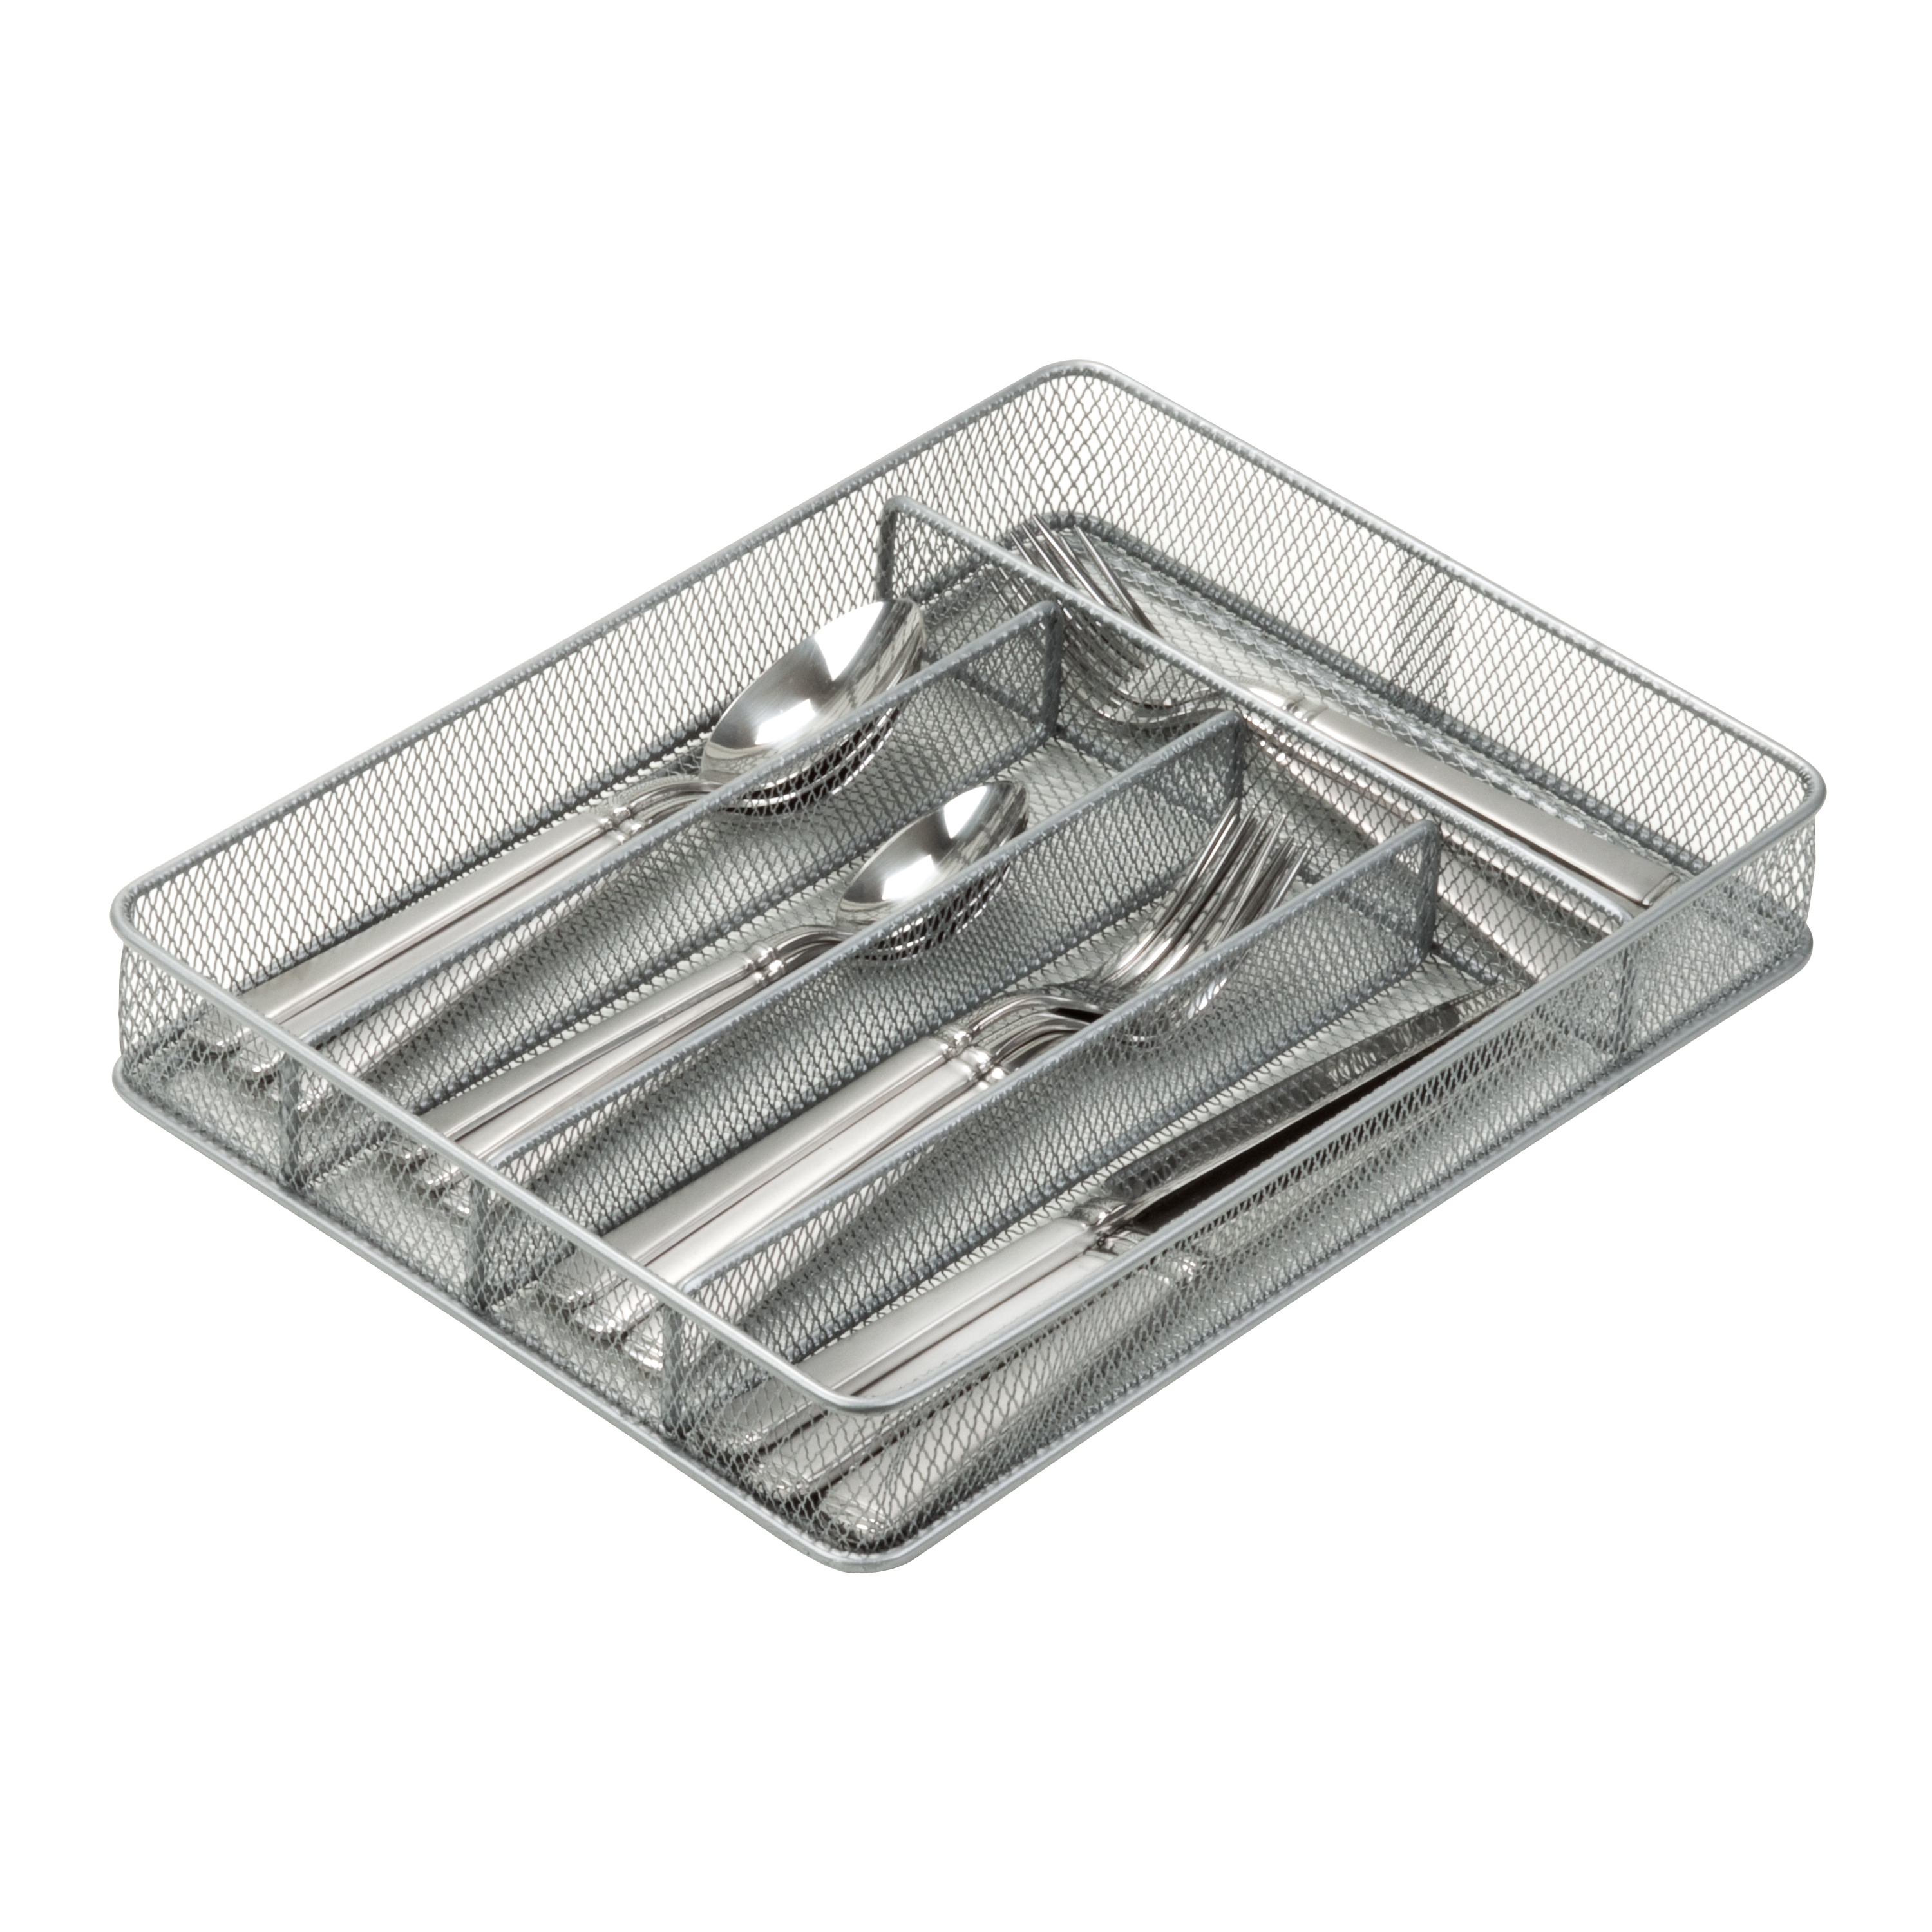 Honey-Can-Do Steel Mesh 12.25” x 9.25” x 2” 5-Compartment Drawer Organizer Tray, Silver - image 4 of 5